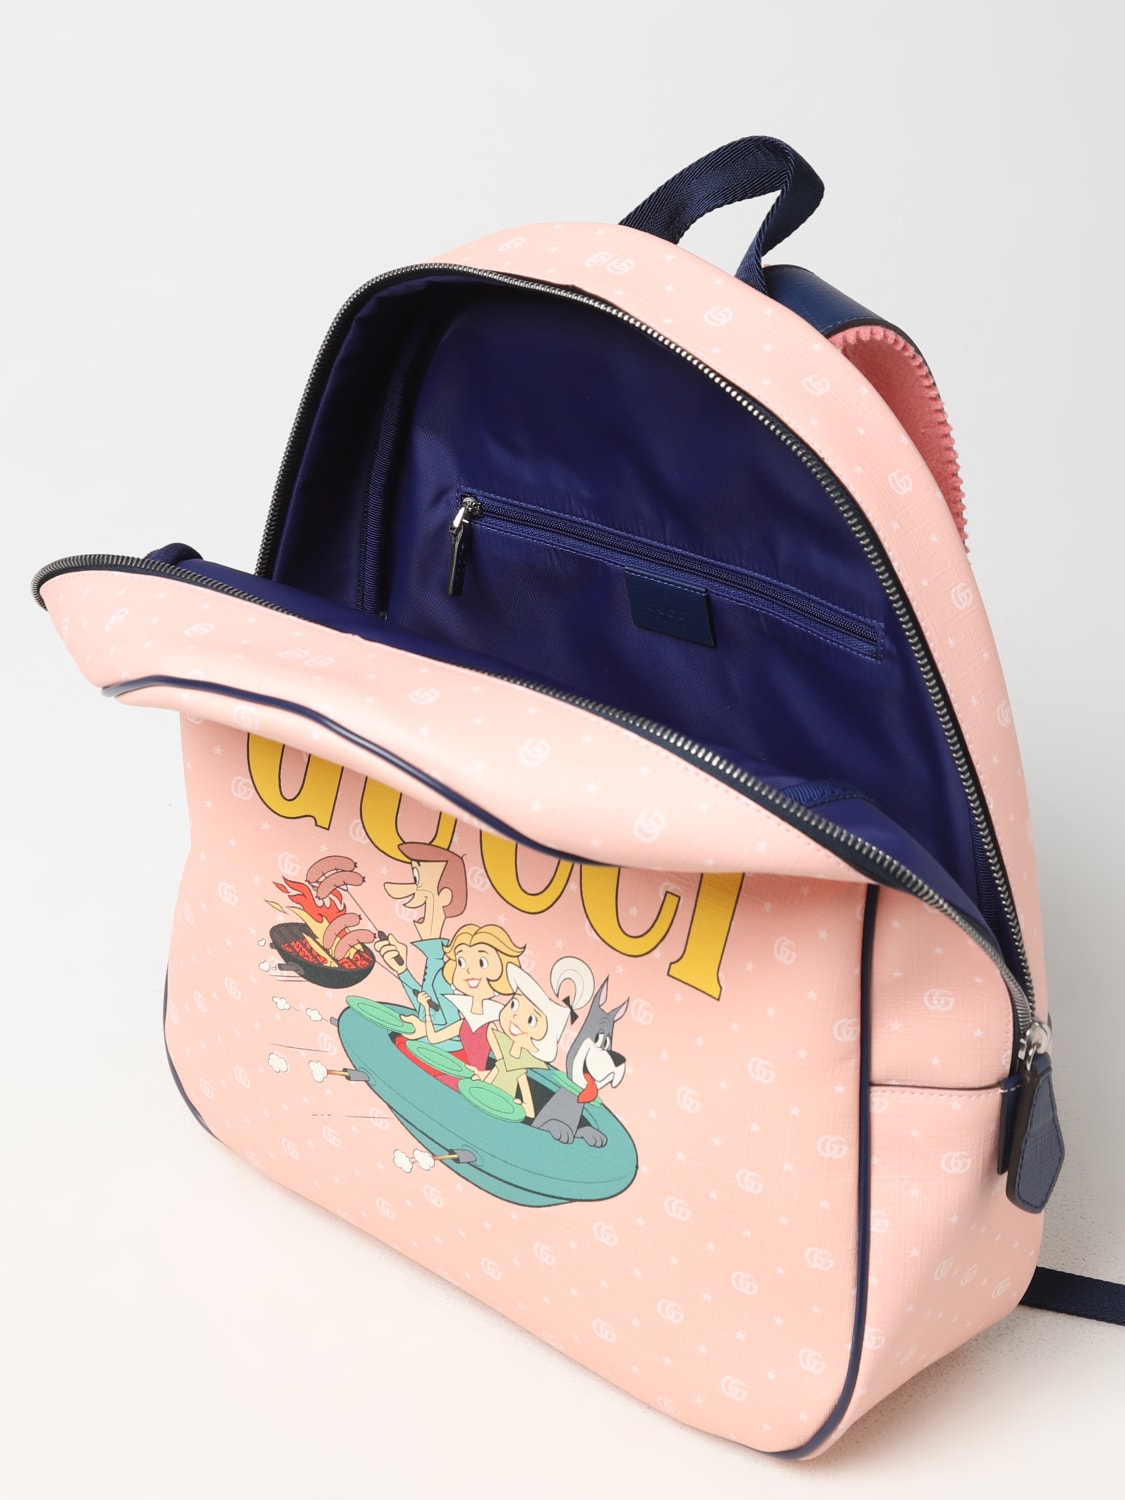 GUCCI: The Jetsons© x backpack in coated cotton with all-over